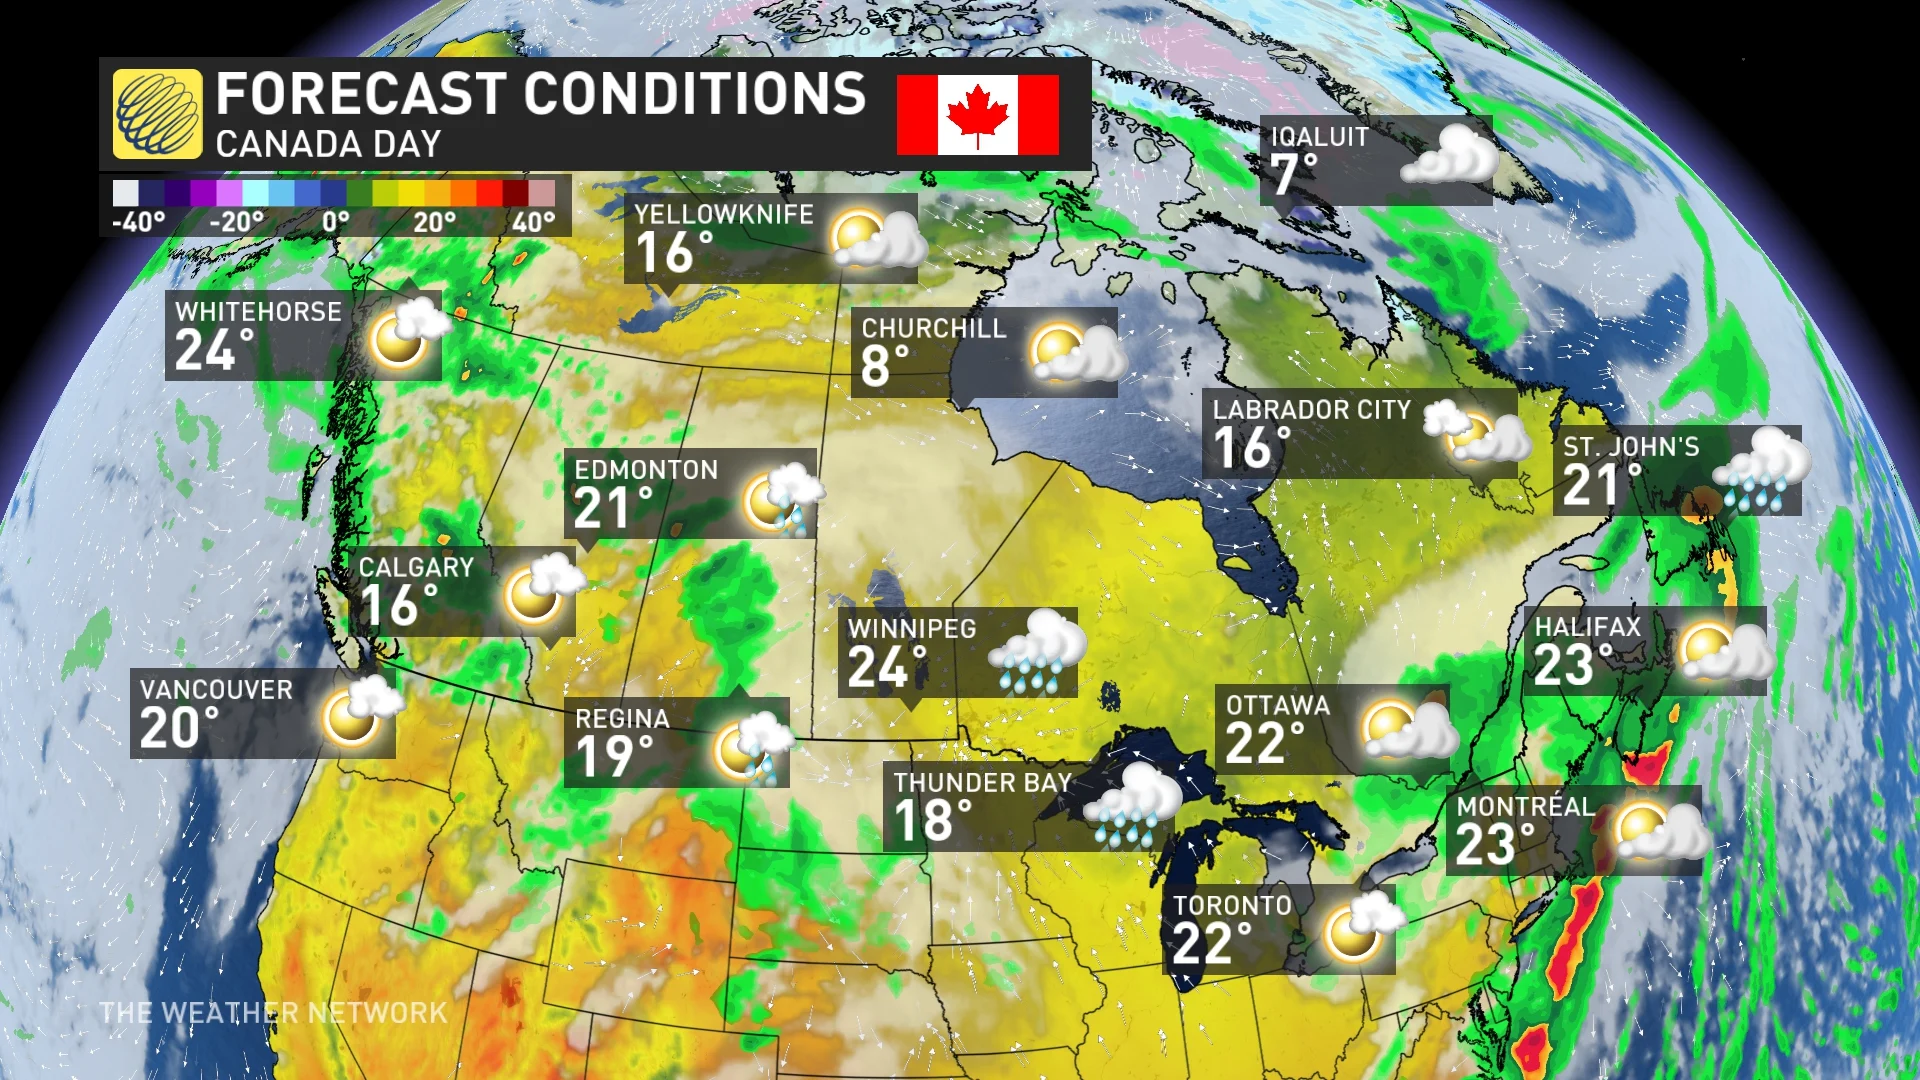 Baron - Canada Day forecast conditions